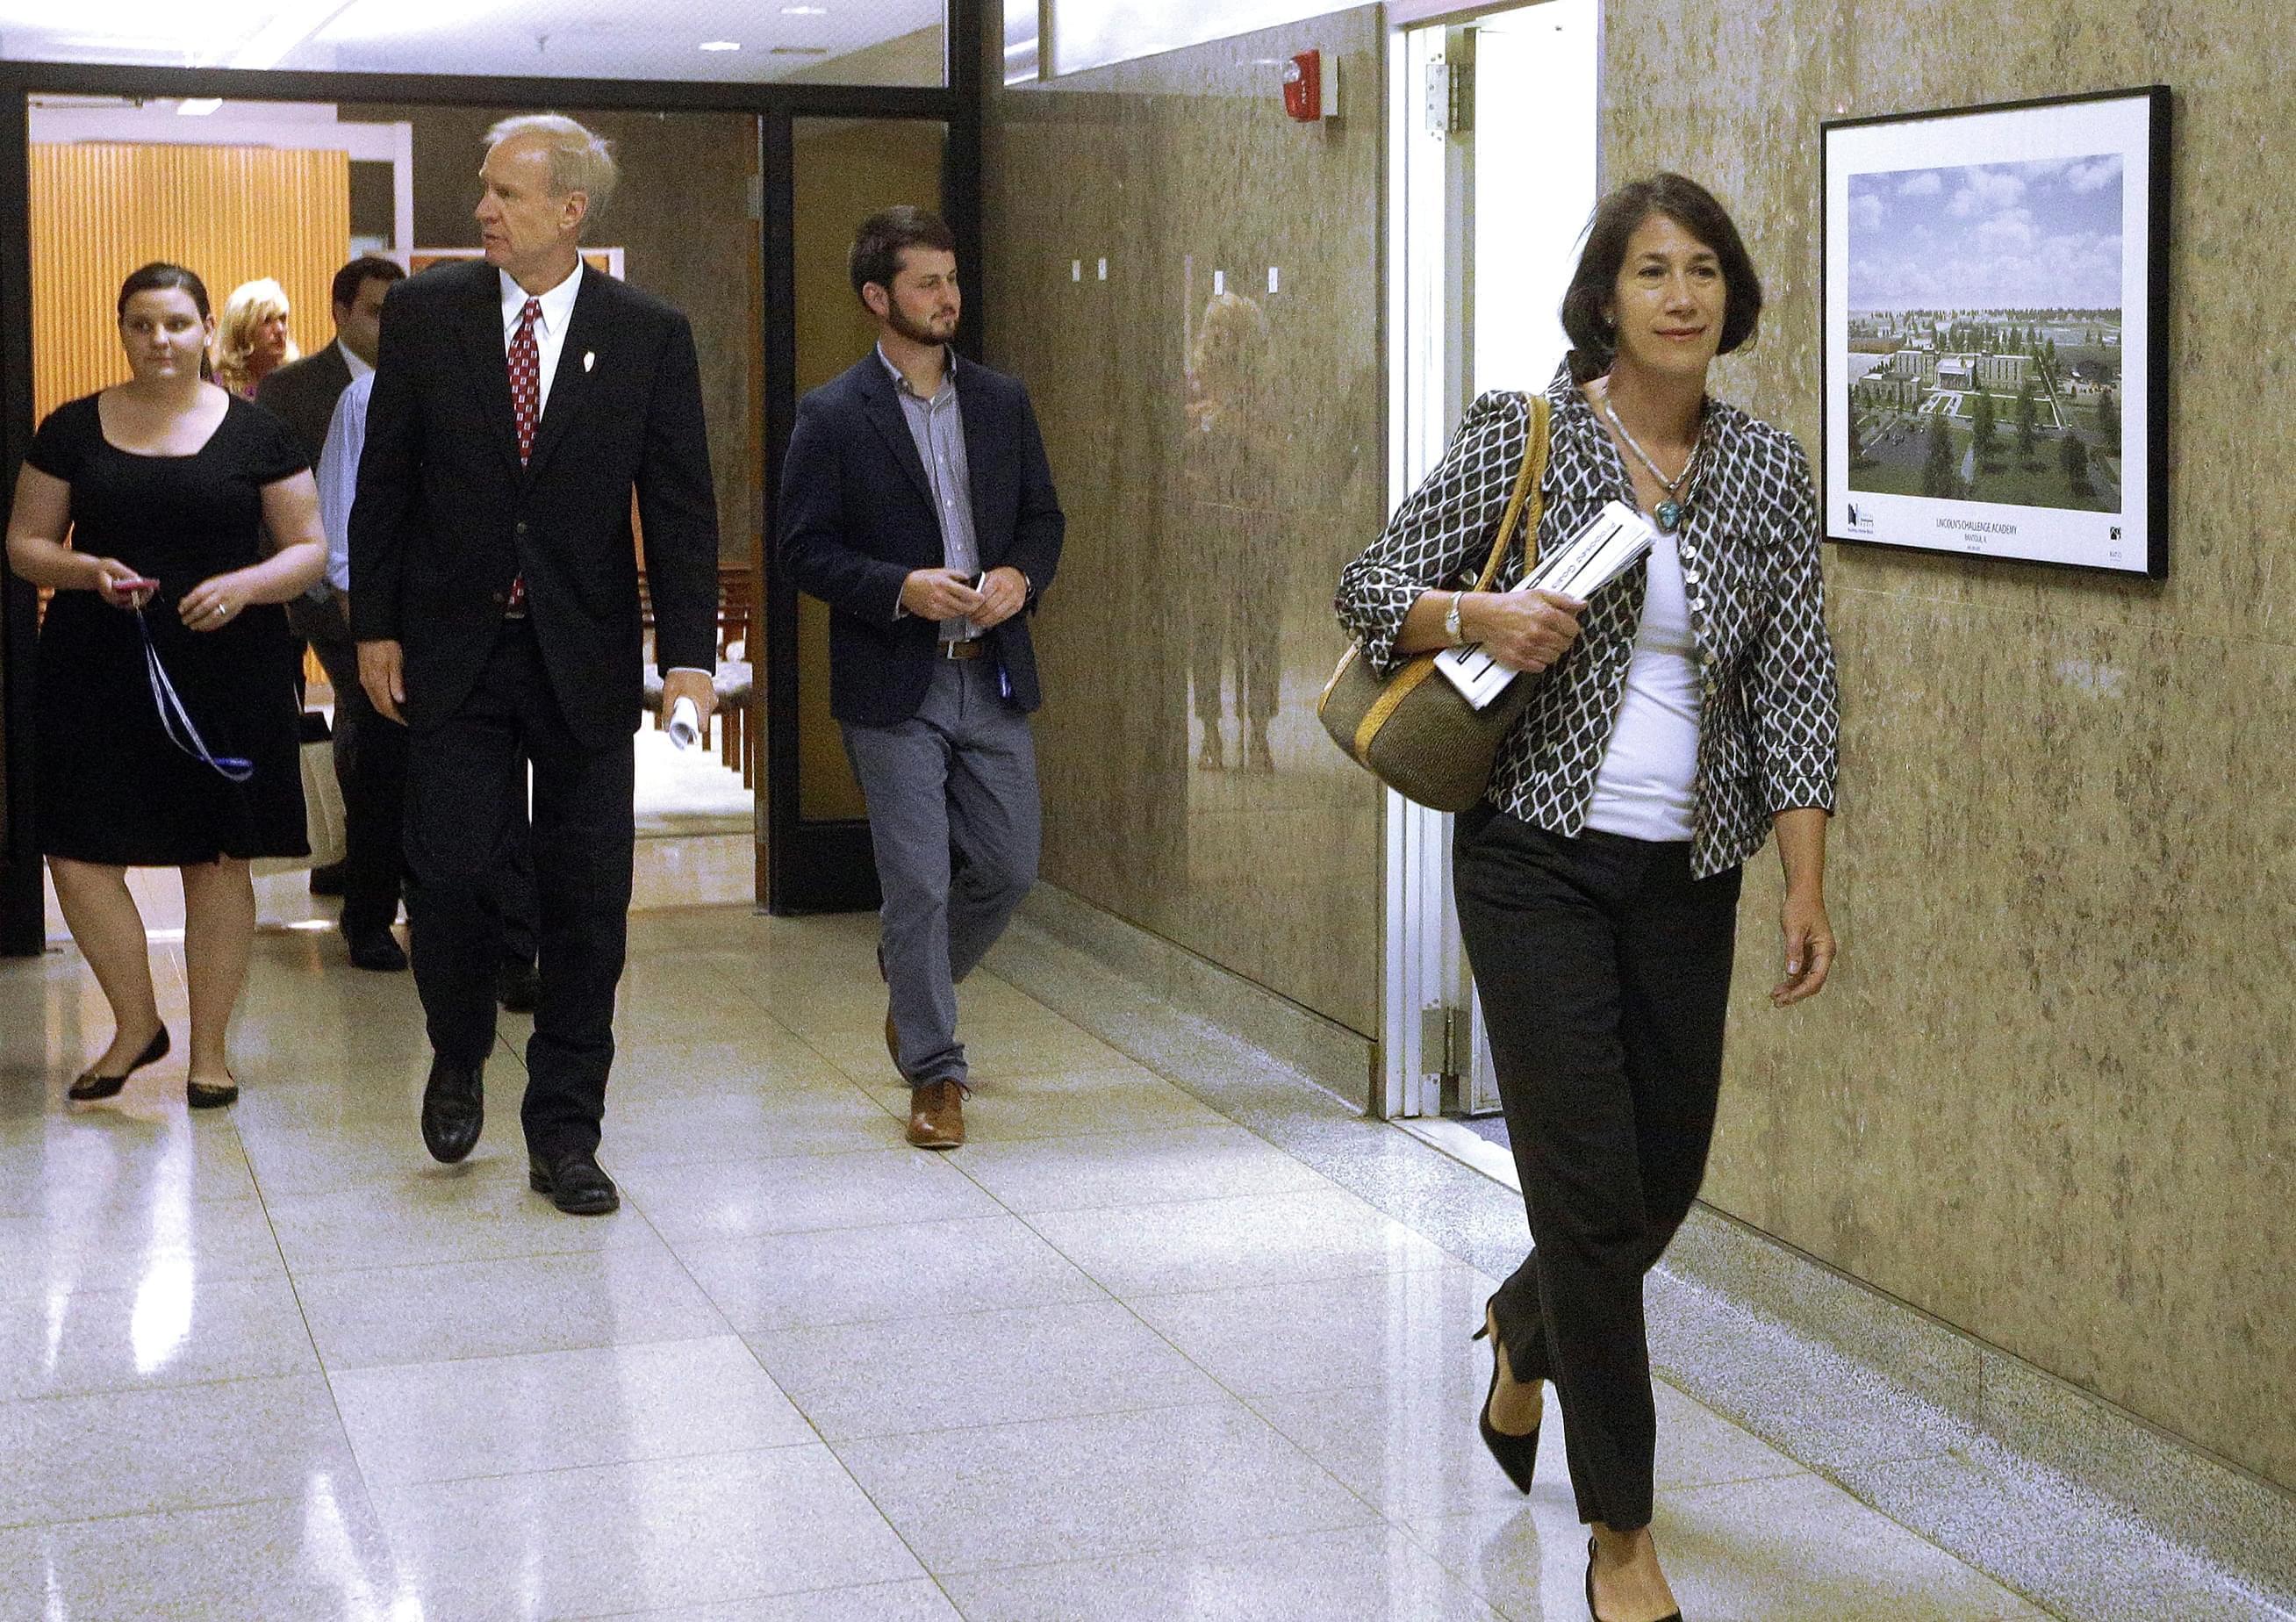 Illinois Gov. Bruce Rauner, left, and his wife Diana Rauner, right, walk down a hallway leading to a meeting of the governor's Cabinet on Children and Youth Thursday, June 9, 2016, in Springfield.